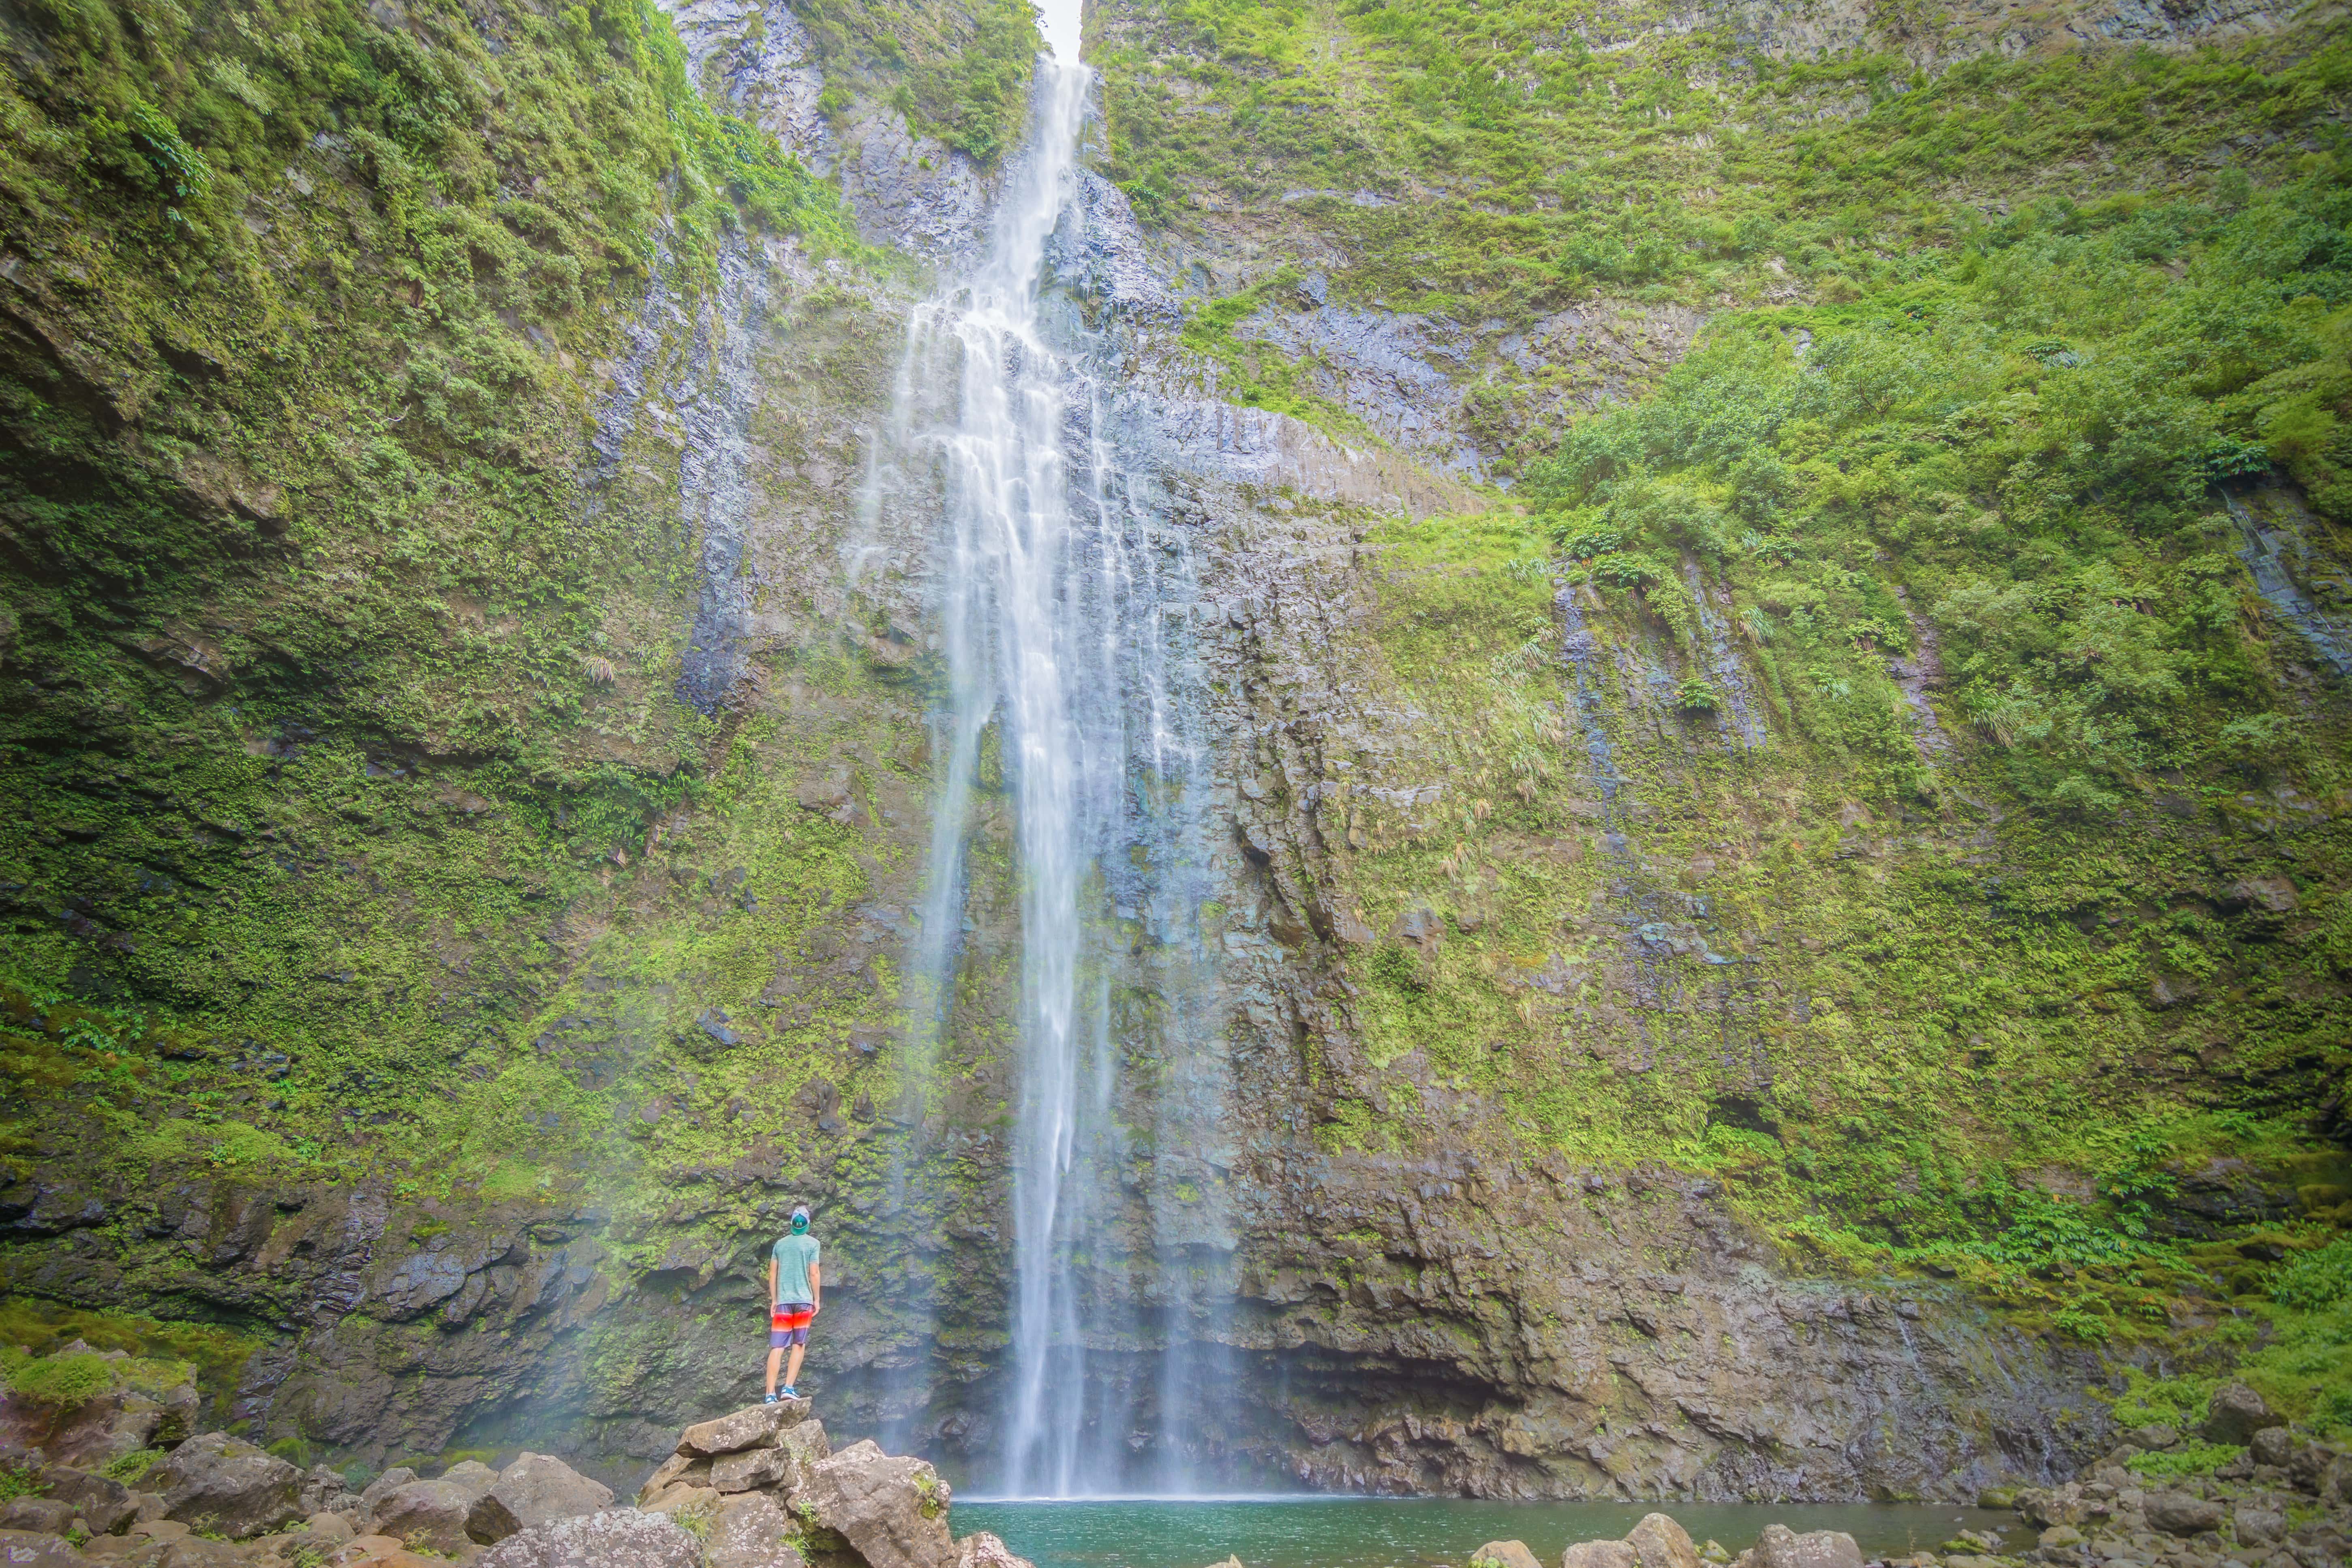 Hanakapi’ai Falls // Discover the best things to do in Kauai for outdoor adventurers including scenic waterfall hikes, secluded beaches, water activities, & more!